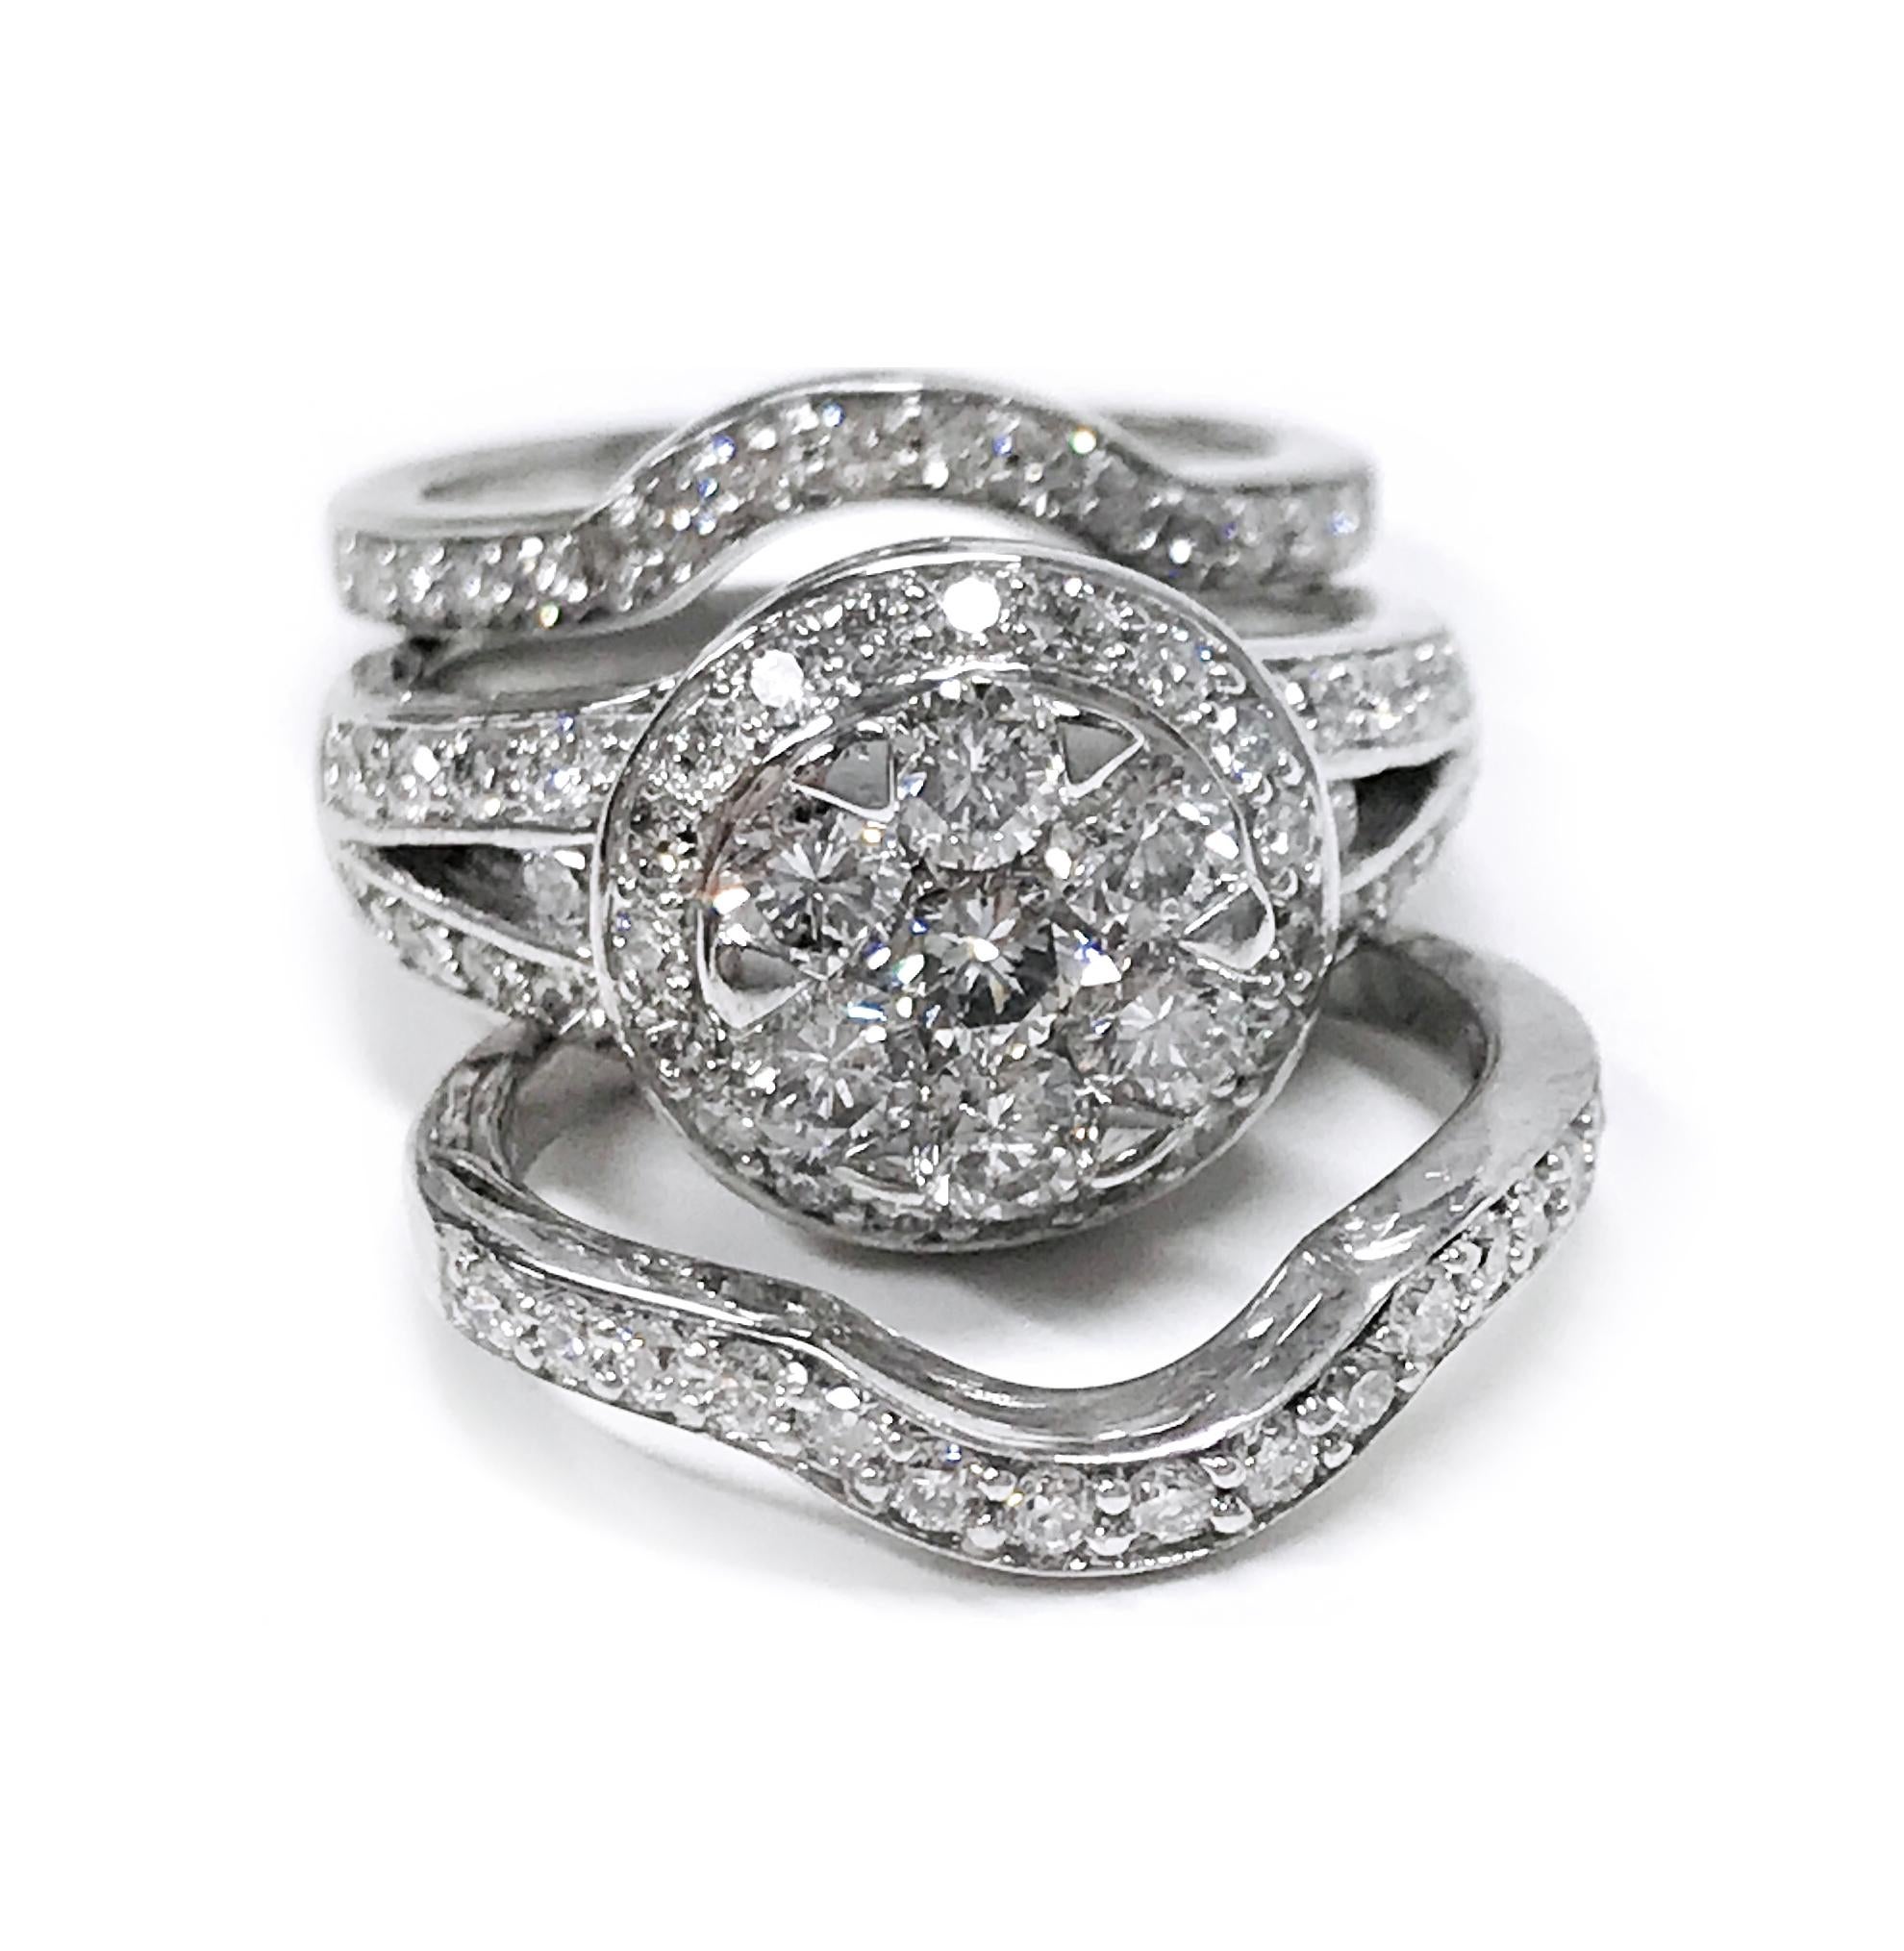 14 Karat White Gold Diamond Triple Ring Set. The middle split band ring has seven round diamonds set in the center with a halo of nineteen diamonds and eighteen side diamonds. The diamonds are VS2-SI1 (G.I.A.) in clarity and G-H (G.I.A.) in color.